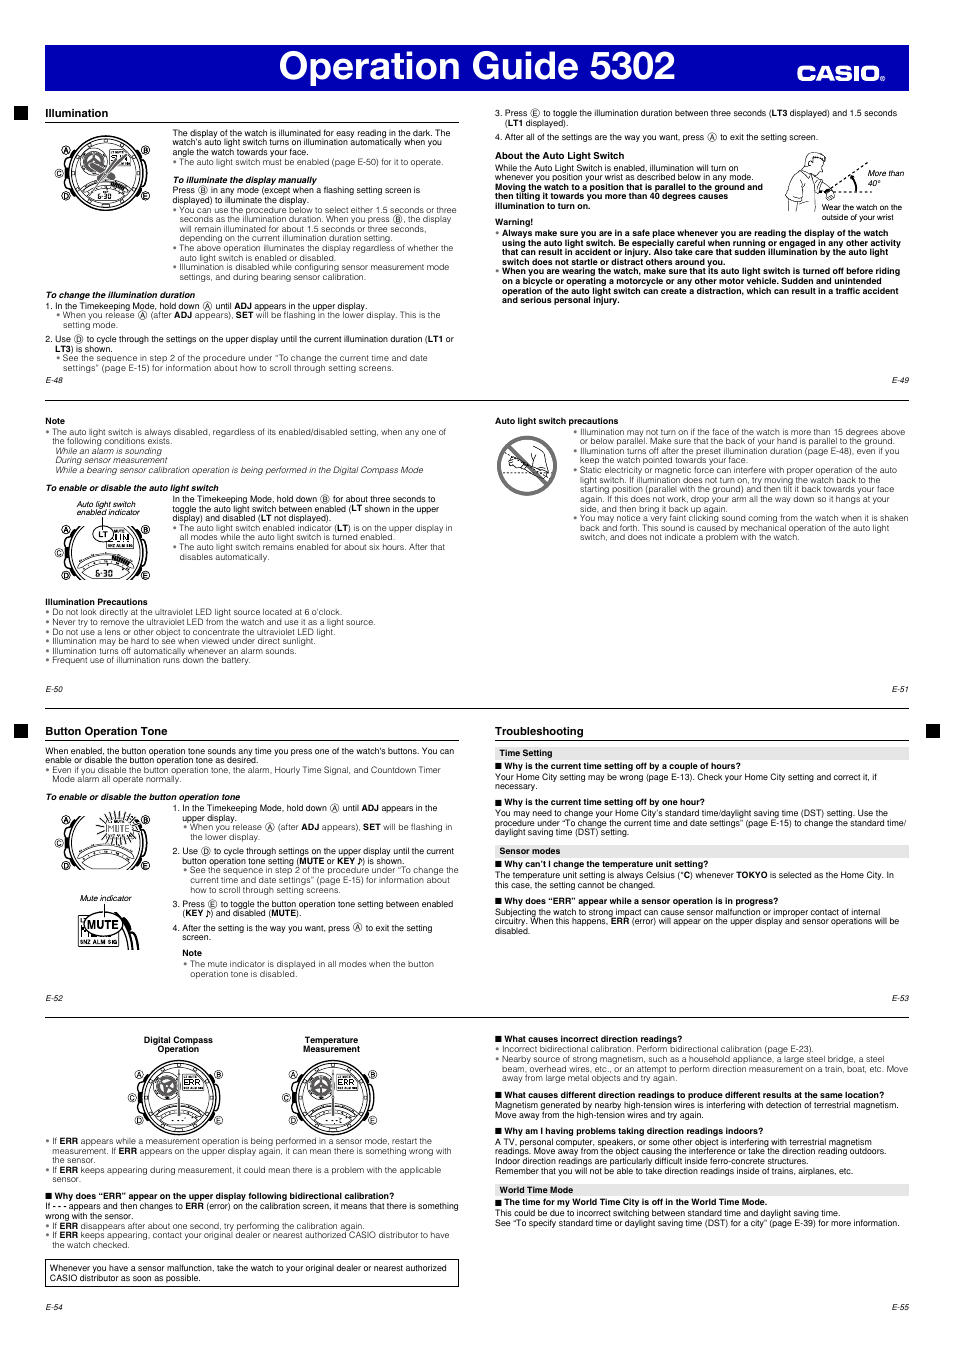 Operation guide 5302 | G-Shock GA-1000 User Manual | Page 7 / 8